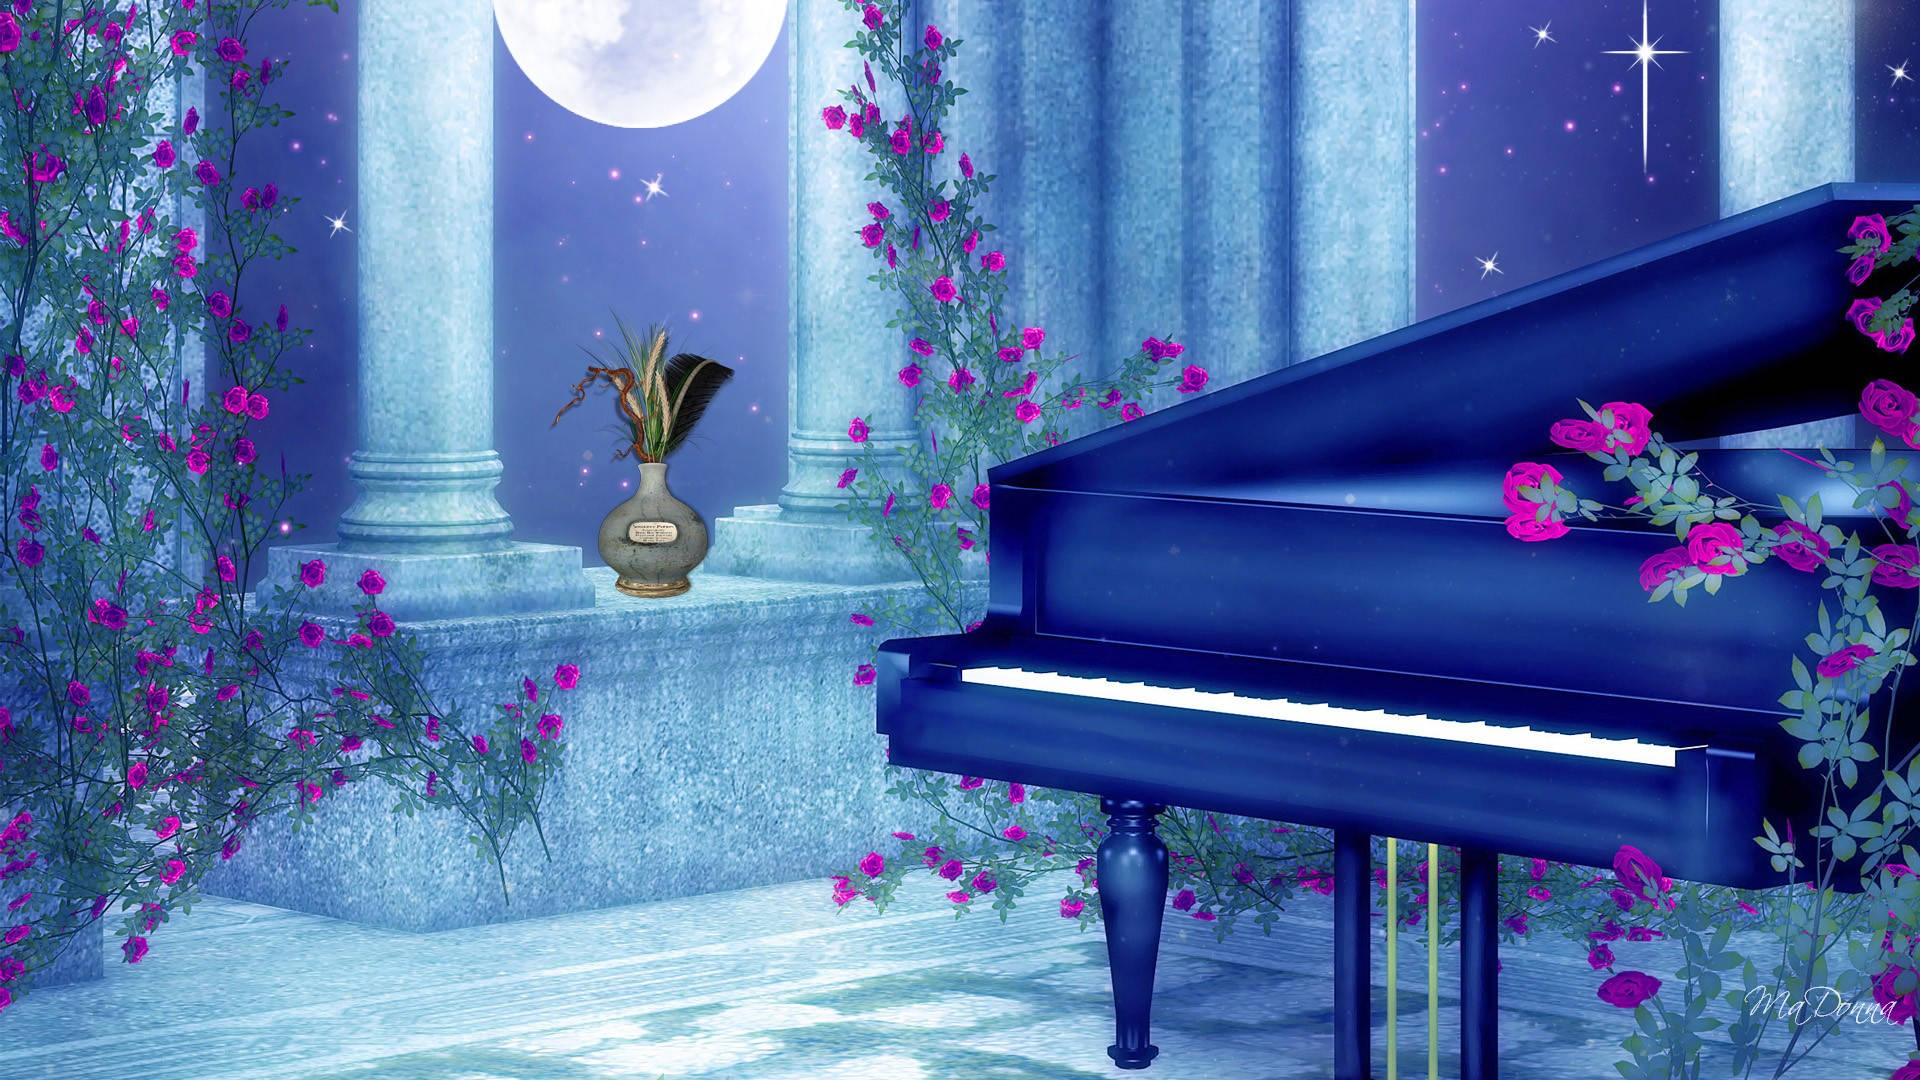 Grand Piano In Moonlight Background